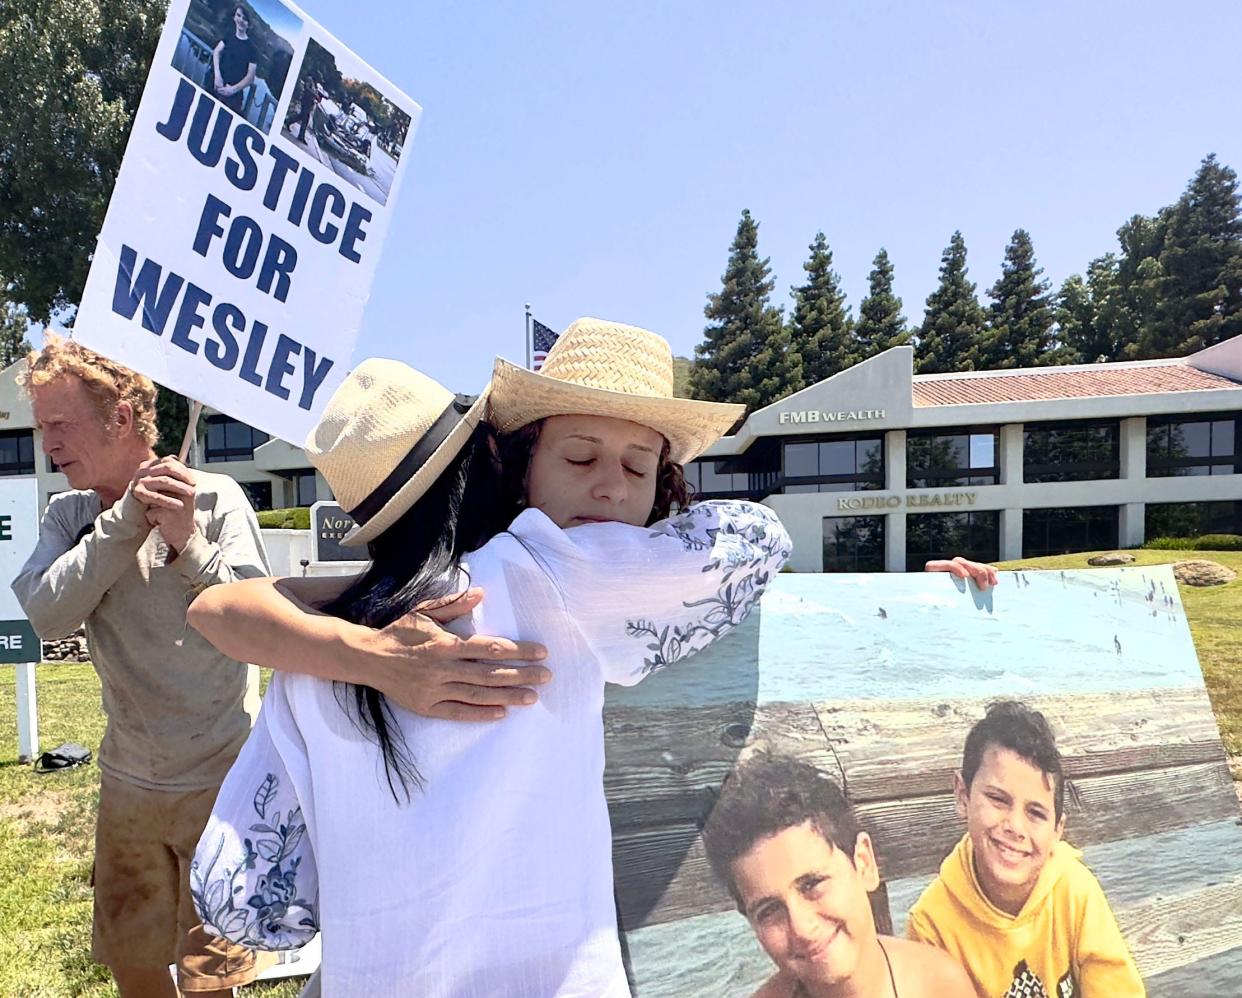 Organizer Julie Cohen gives Miriam Guirguis, aunt of Mark and Jacob Iskander, a hug at the "stand up for victims" event at the corner of Westlake and Thousand Oaks boulevards in June. The boys died while walking in a crosswalk with their family in Westlake Village in September 2020.